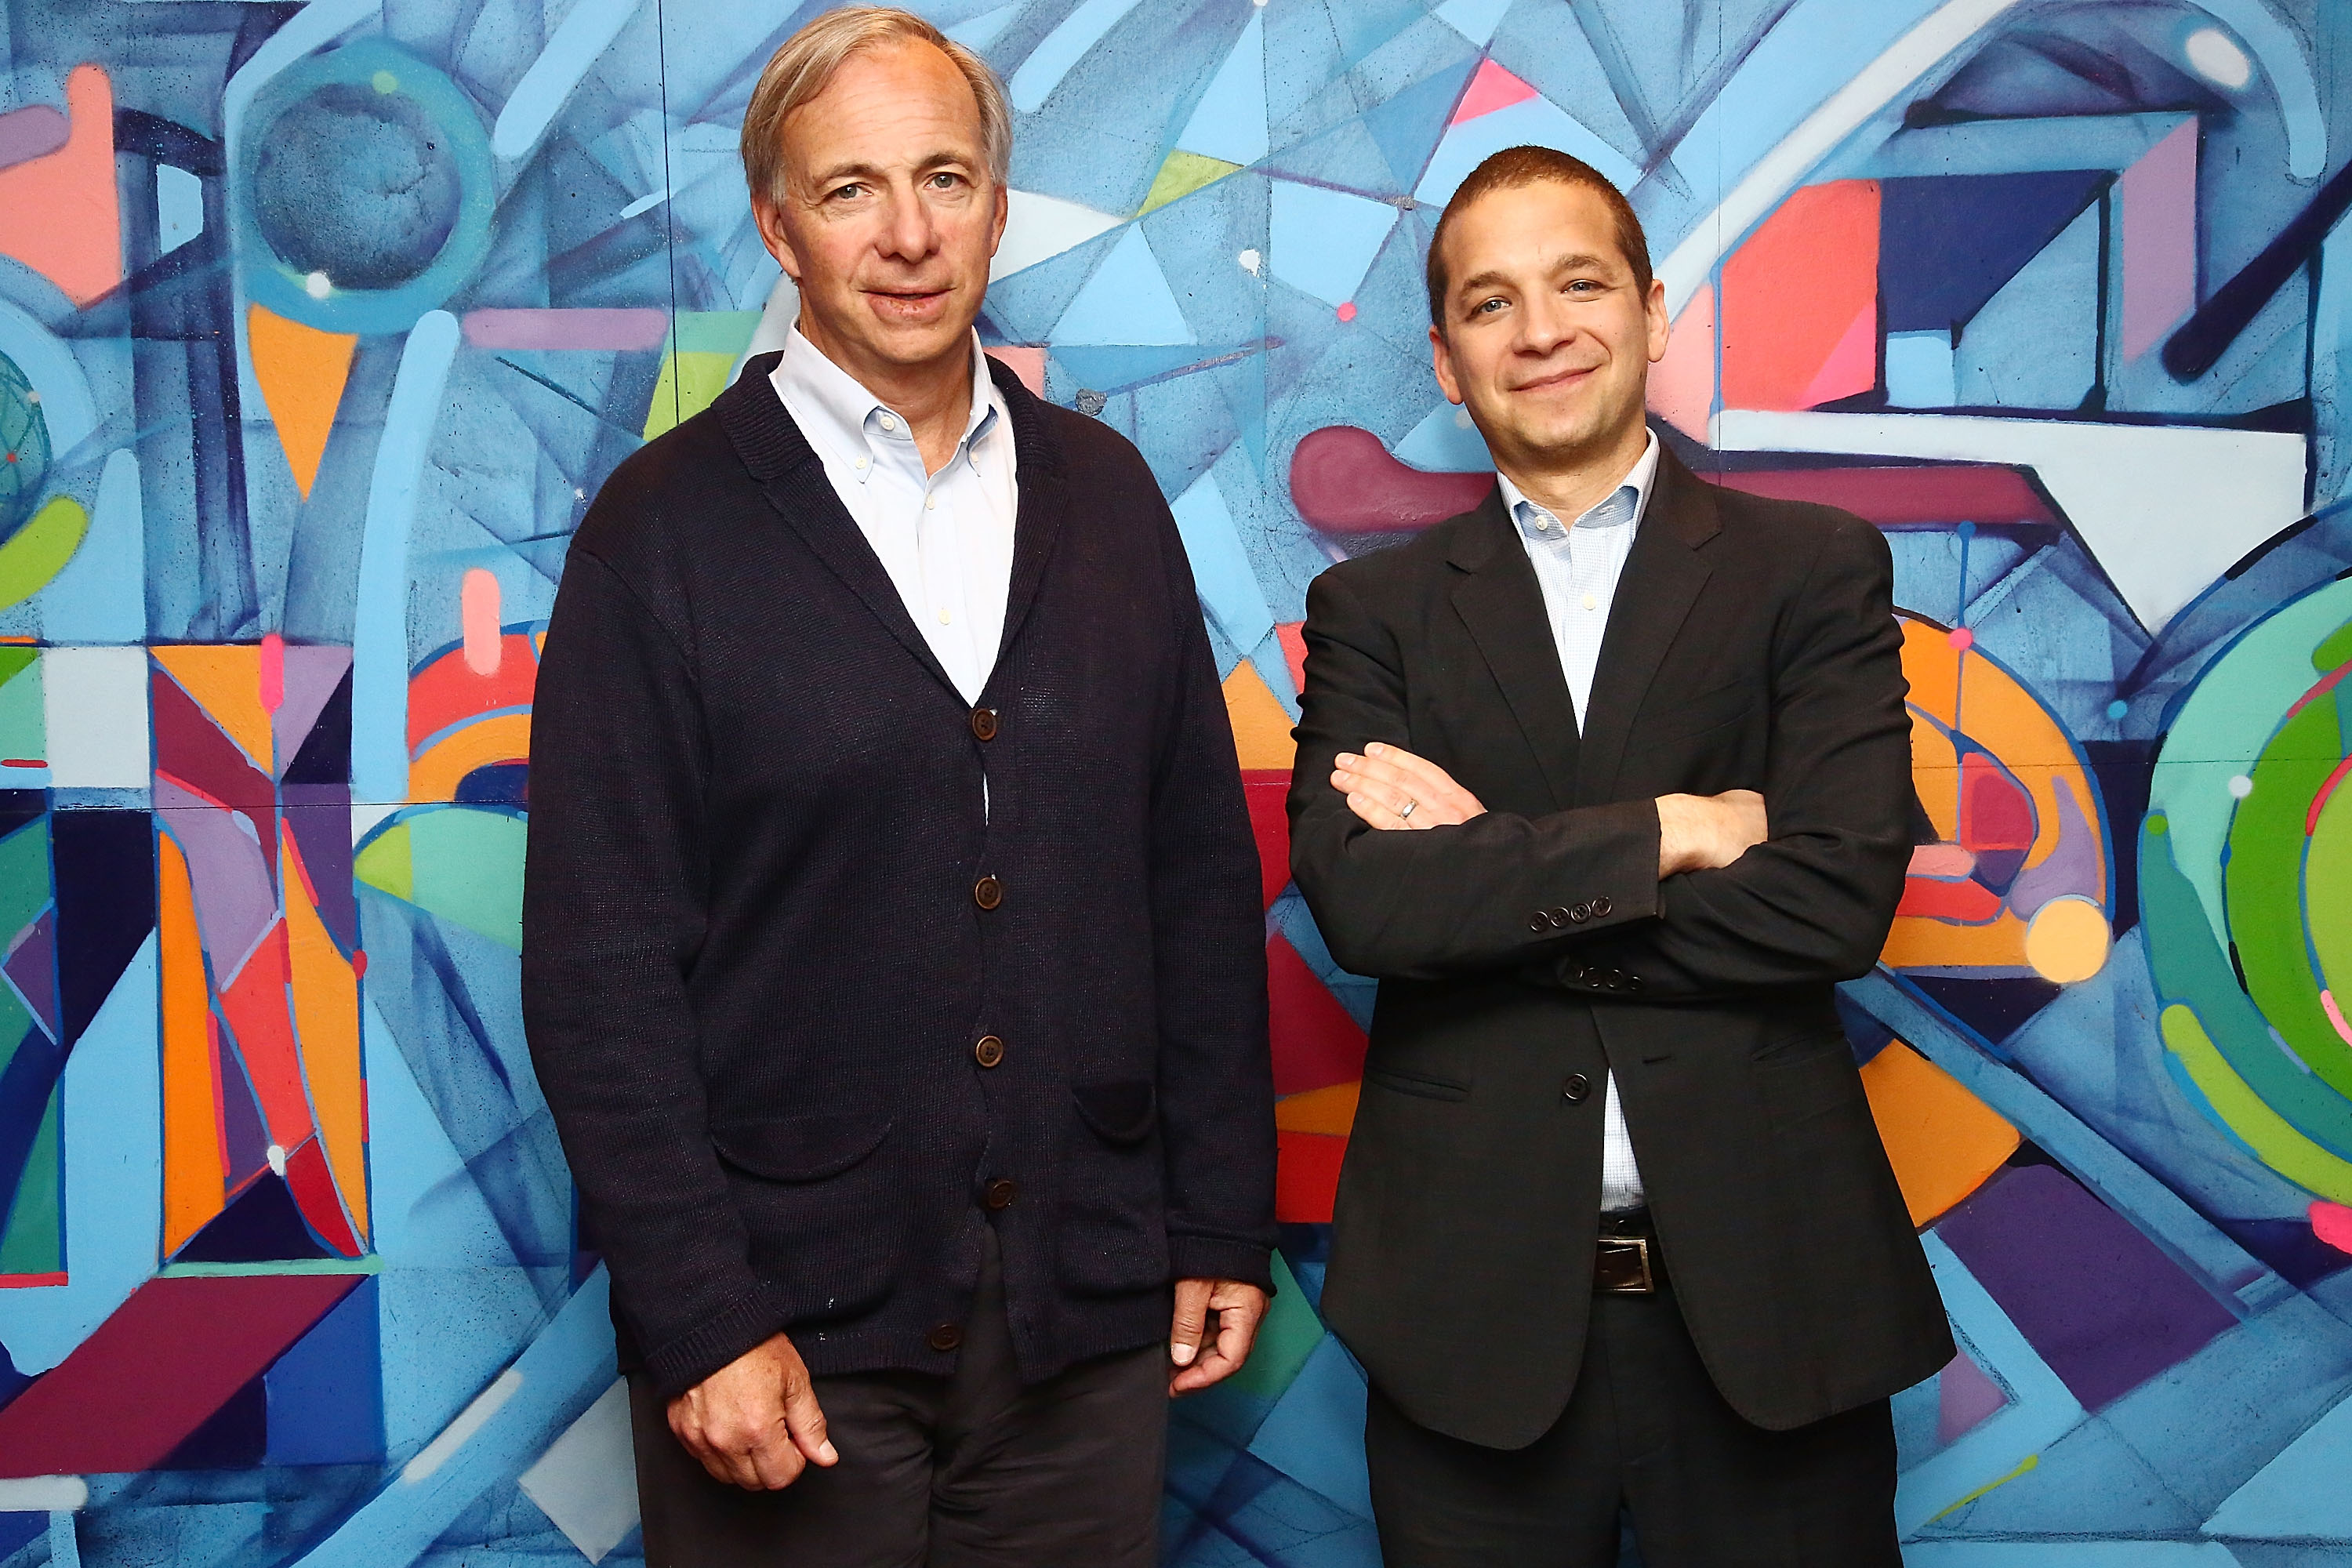 American businessman and founder of the investment firm Bridgewater Associates, Ray Dalio, visits LinkedIn for an interview with Executive Editor at LinkedIn, Daniel Roth at LinkedIn Studios on April 8, 2016 in New York City. 